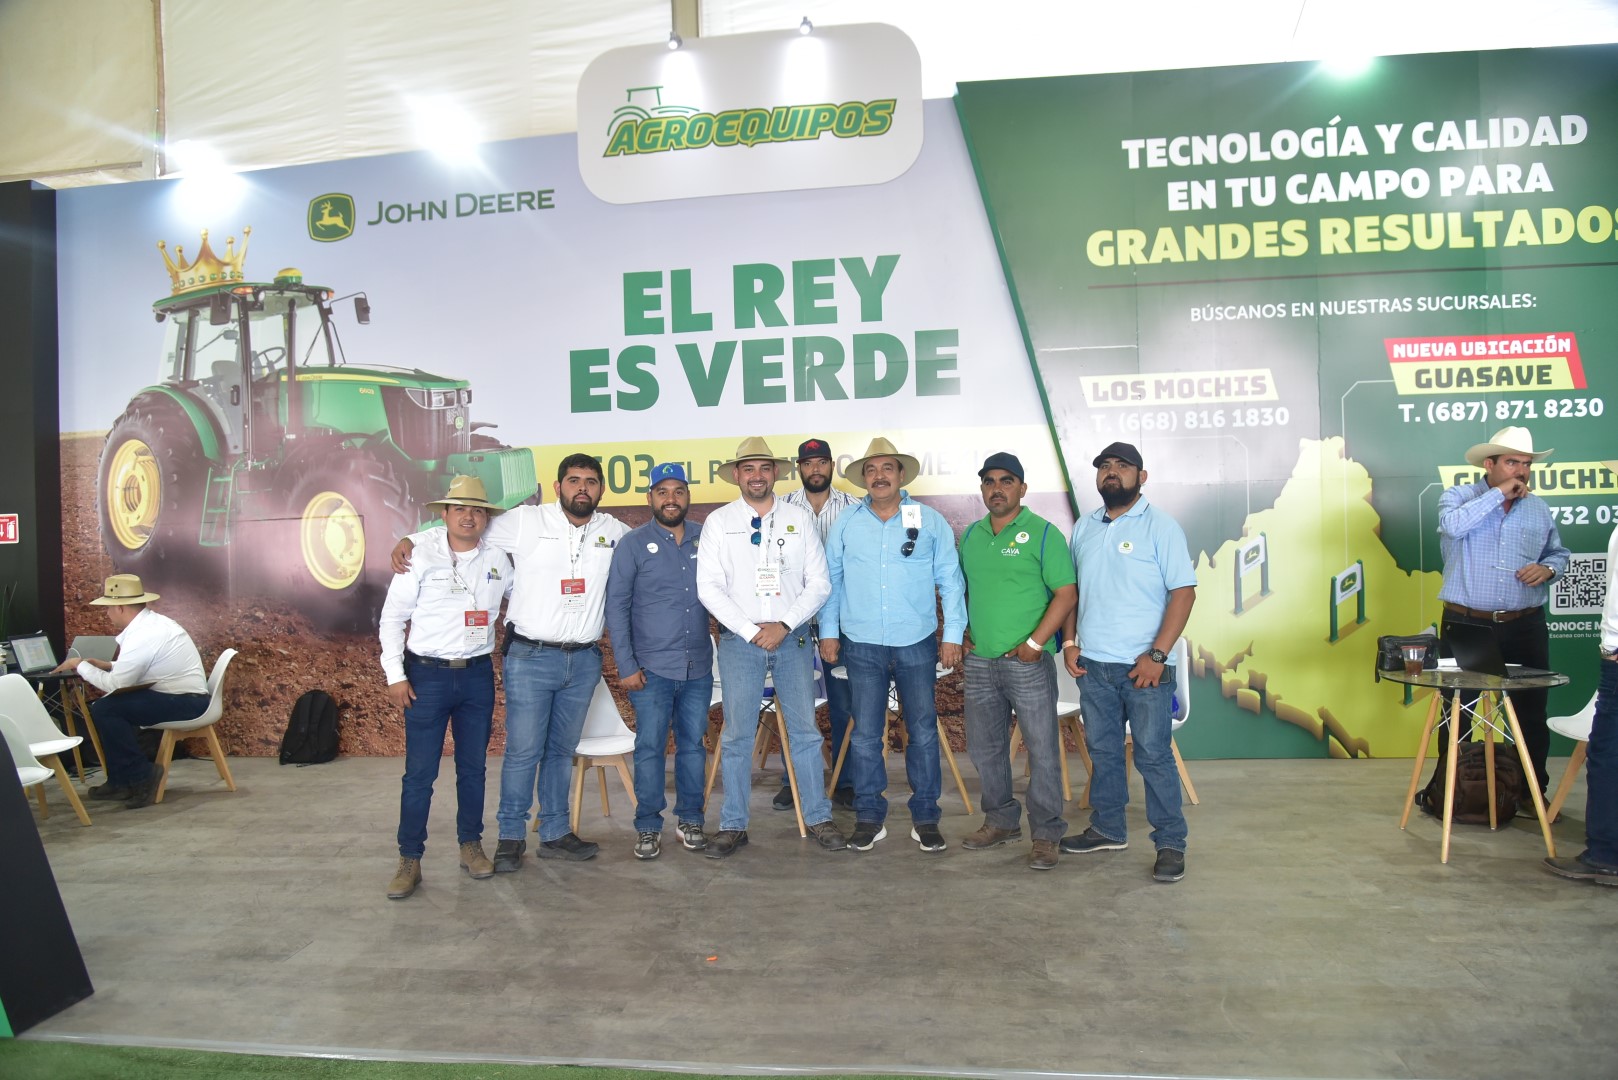 Agroequipos